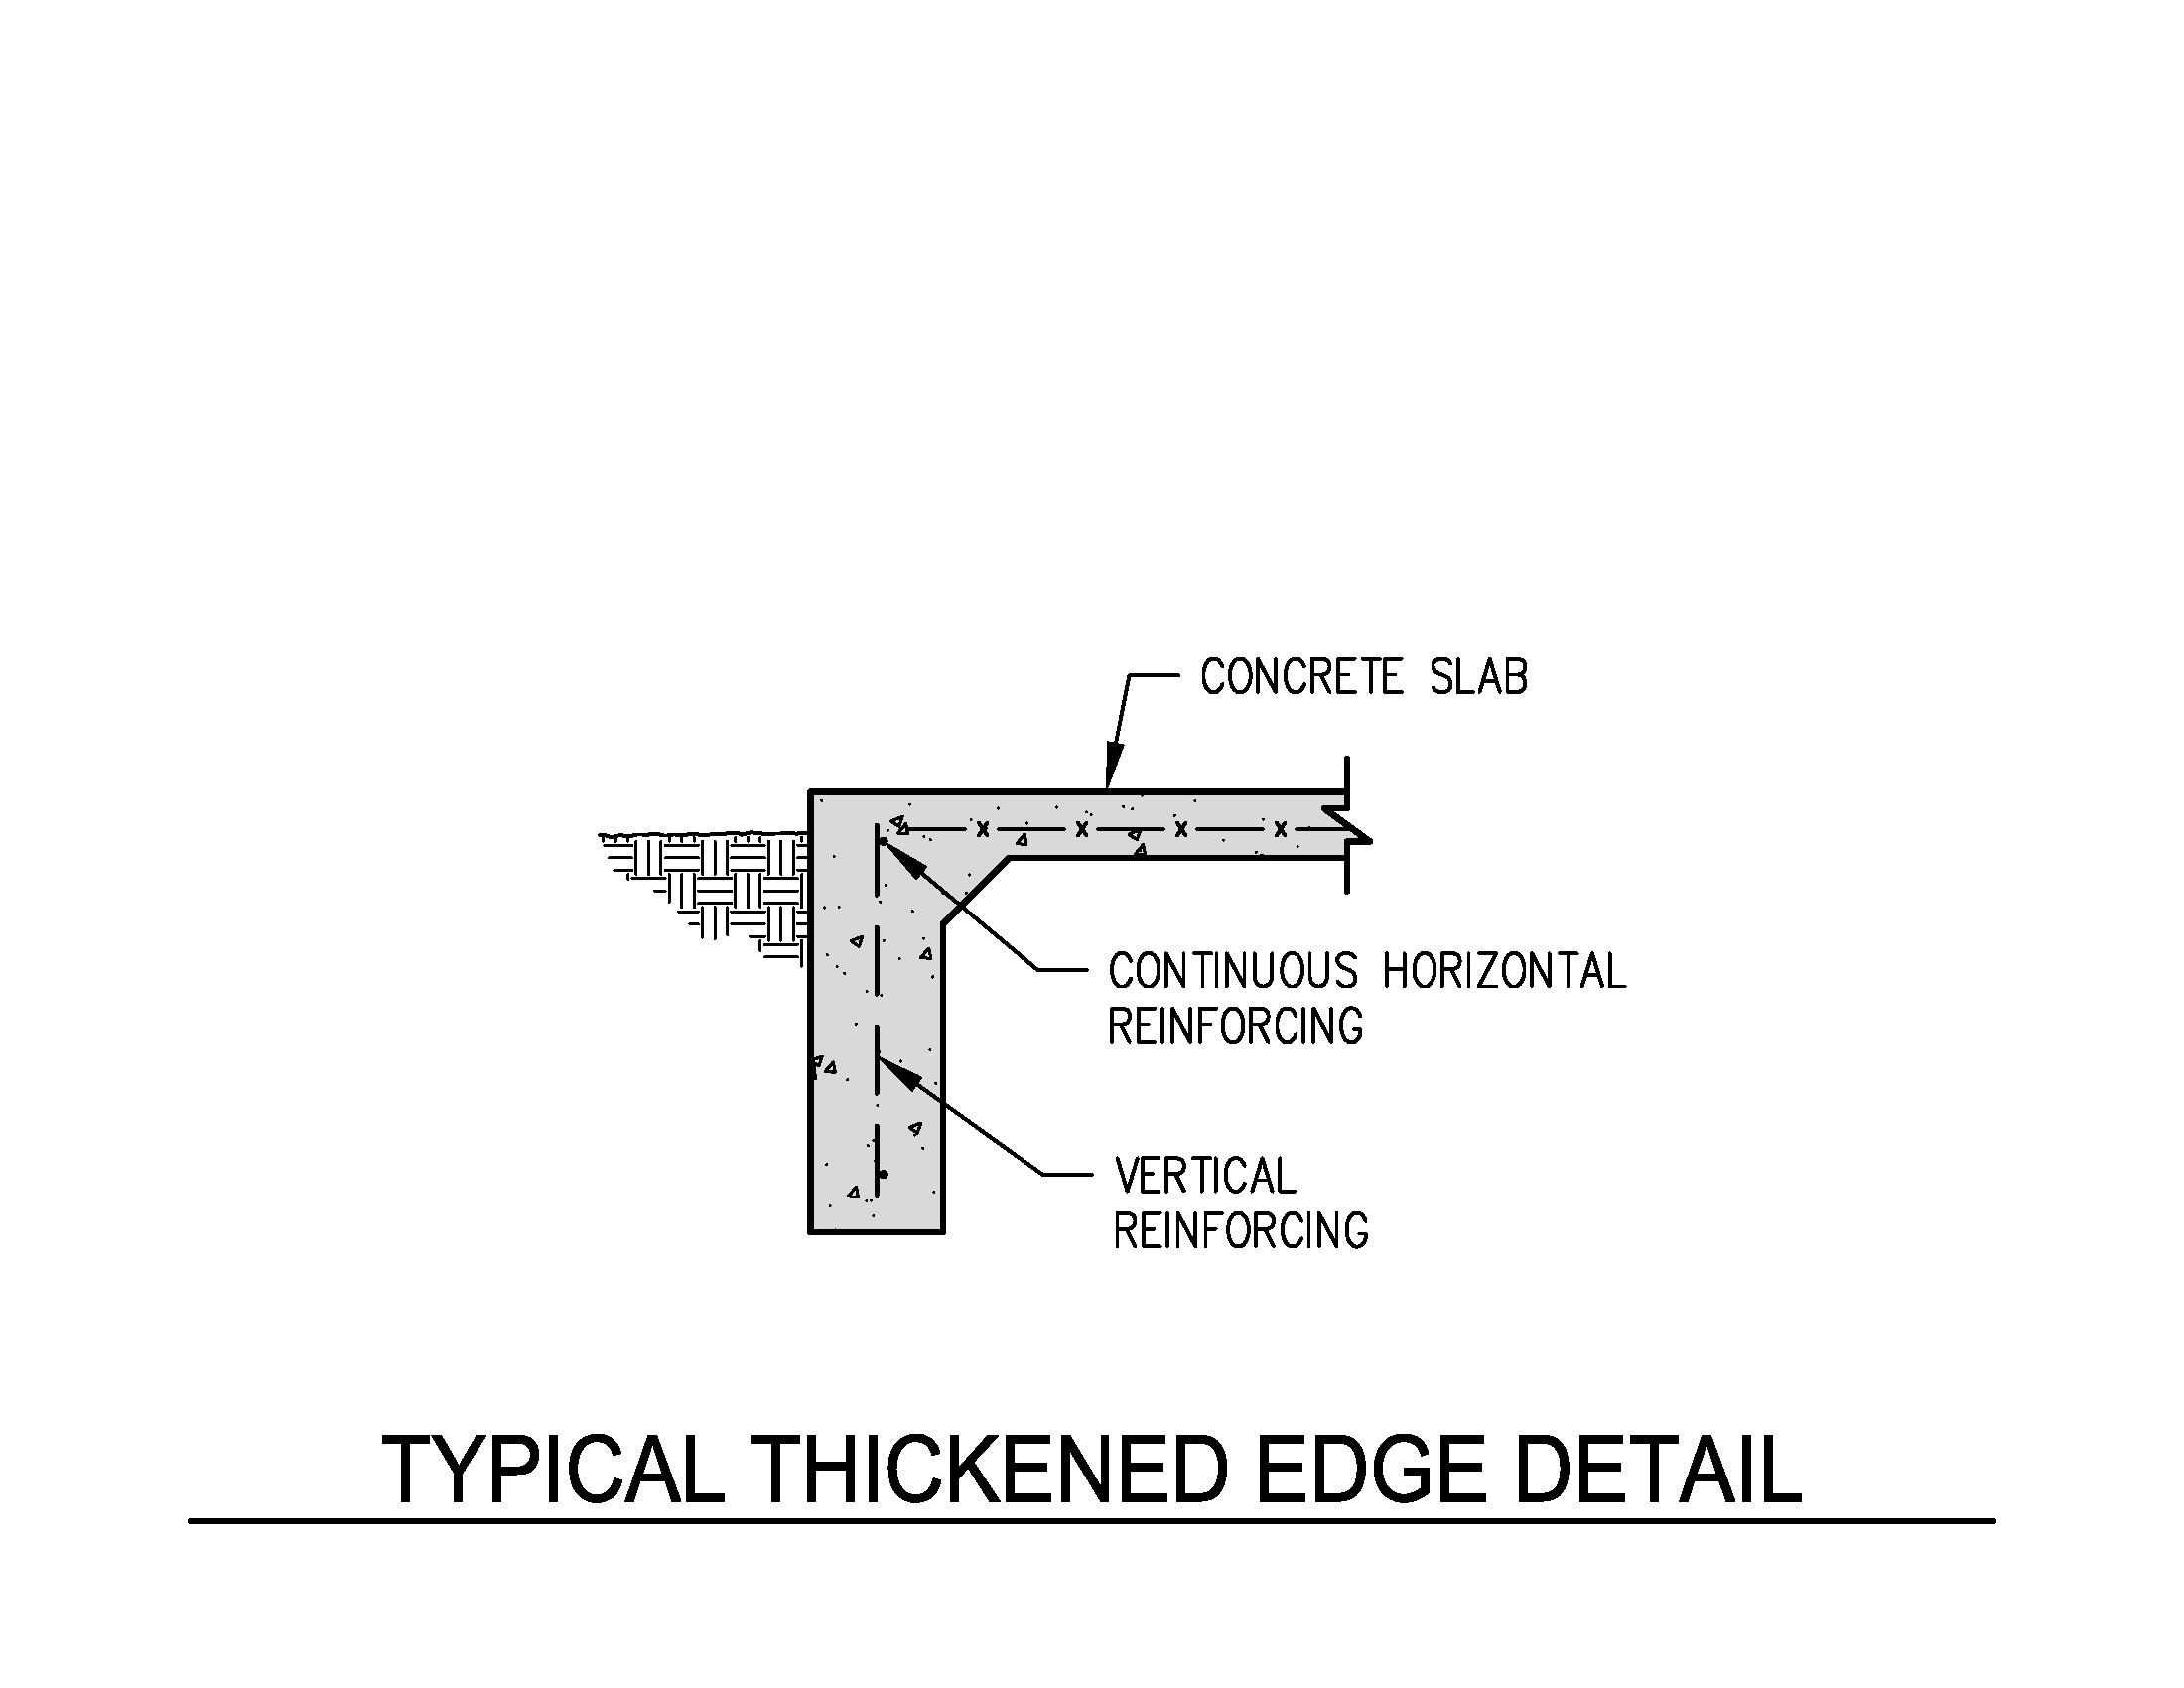 Typical Thickened Edge Detail